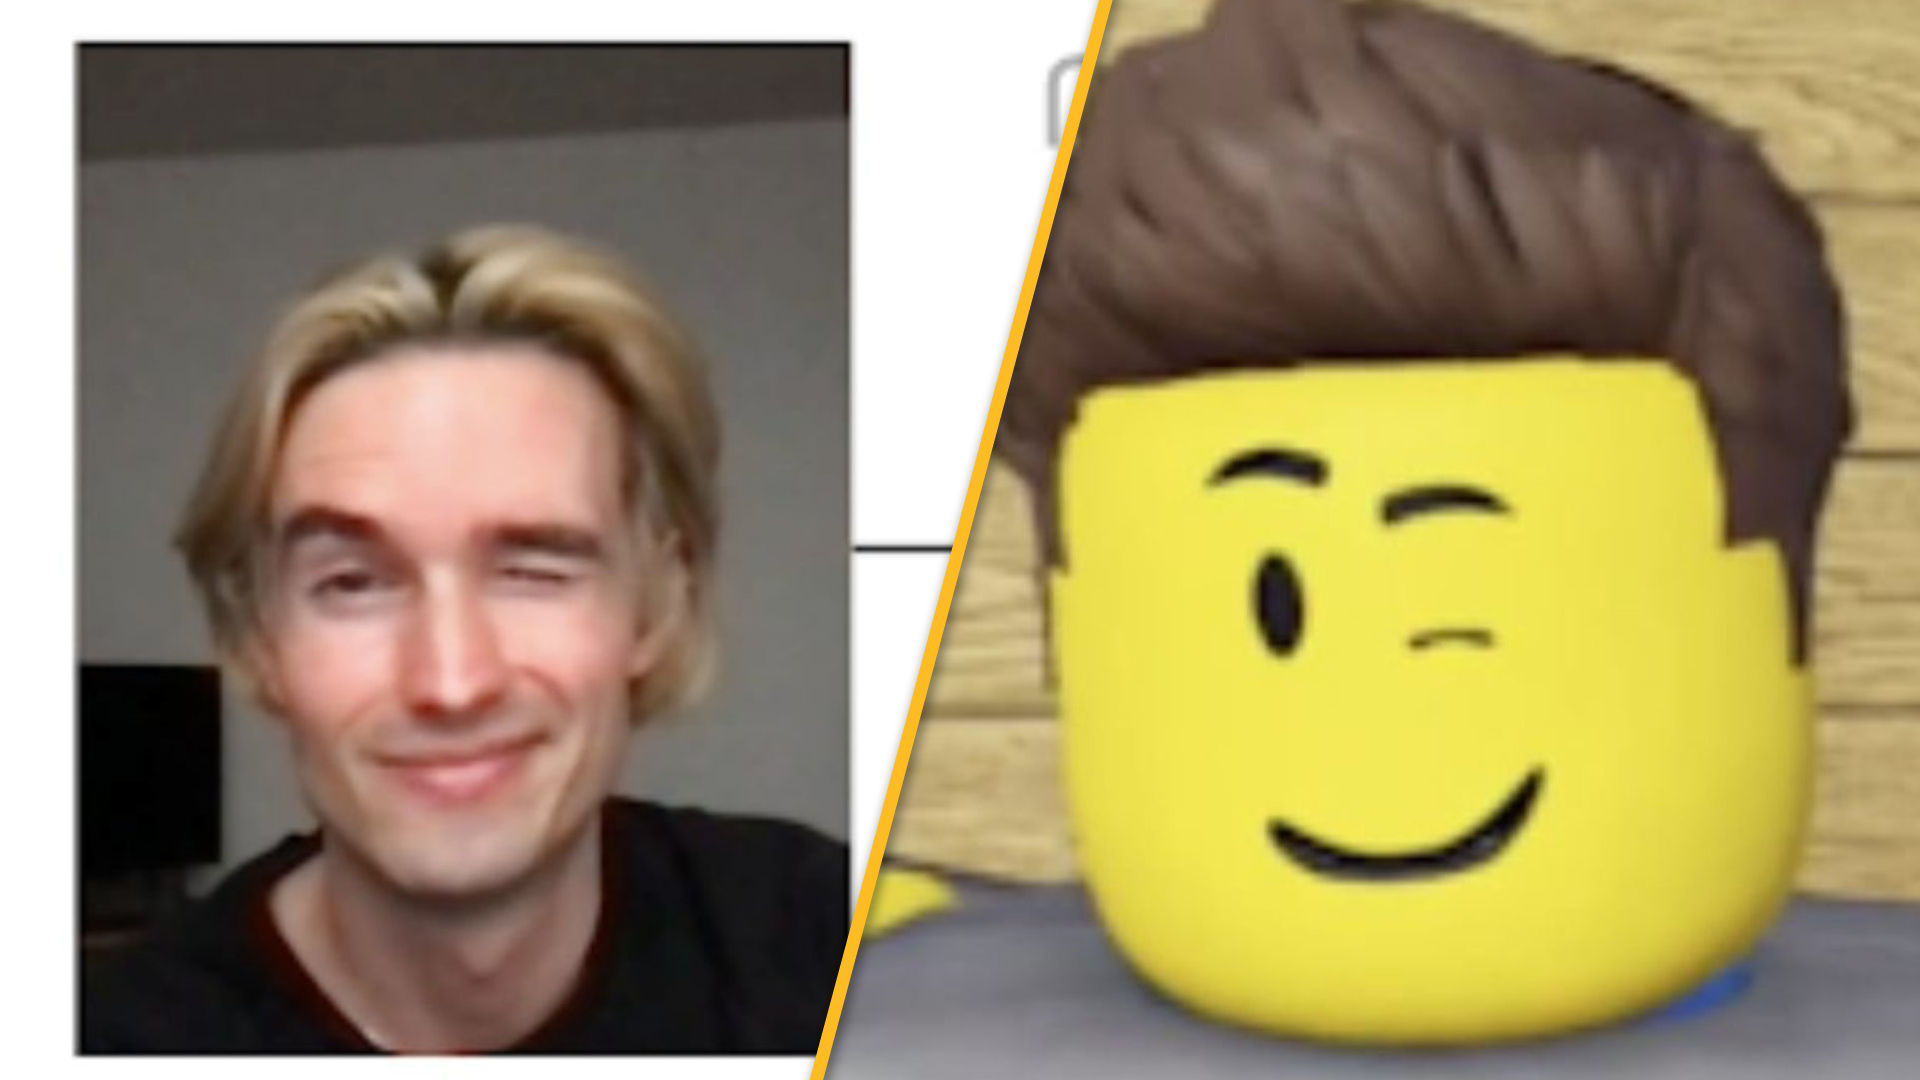 Roblox Avatar Ideas, #roblox #faces #gaming #face #trend #robloxtren, how to create faces in roblox android